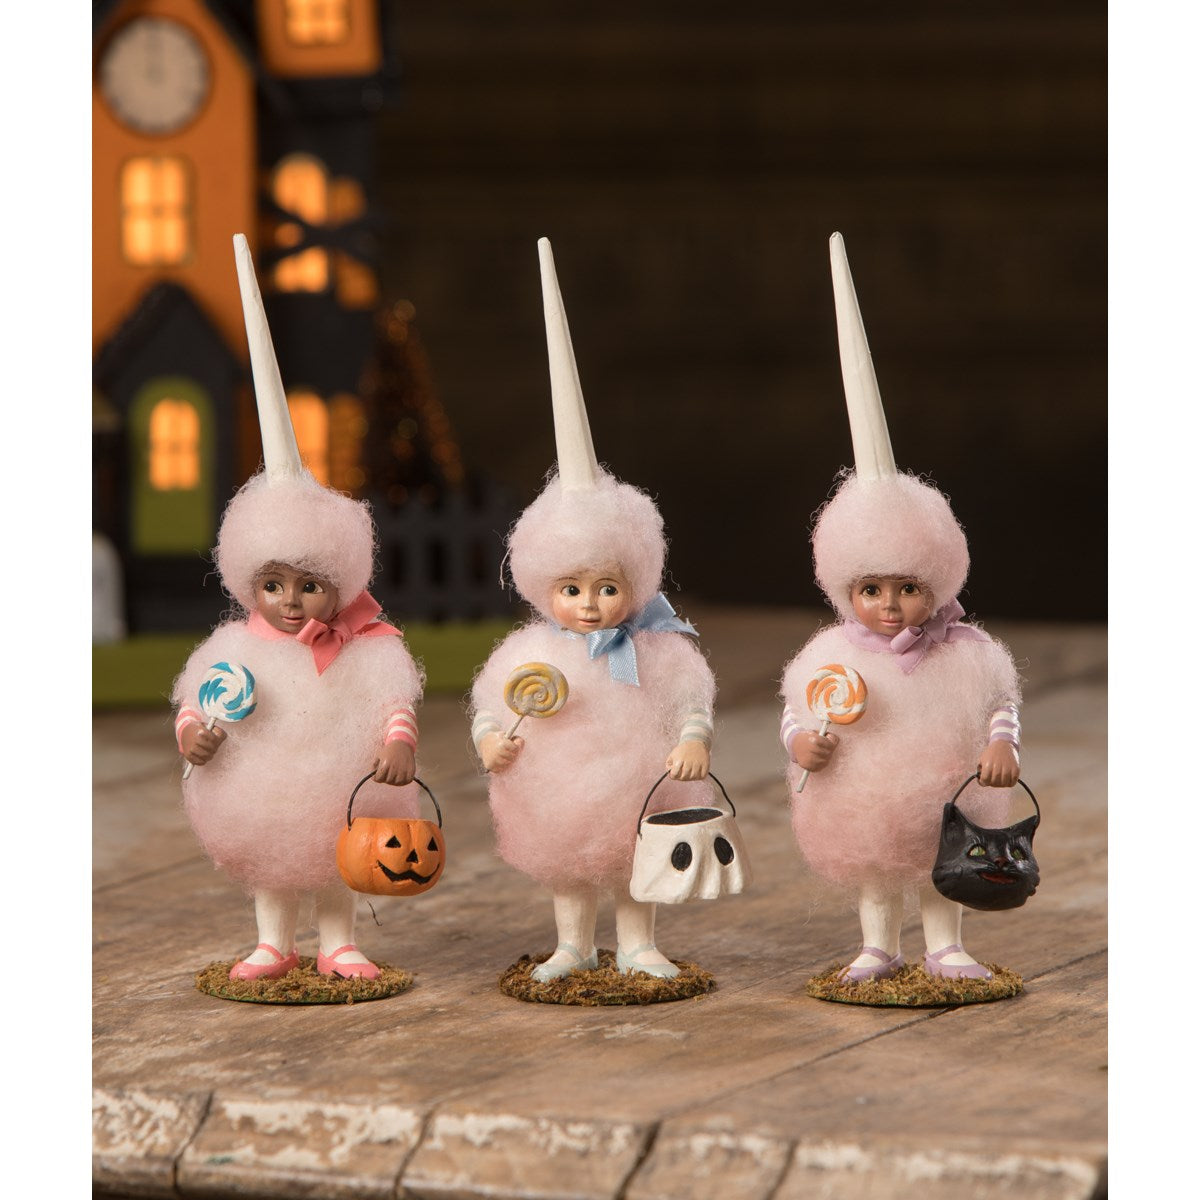 Kids Dressed in Cotton Candy Costumes, Figurines by Bethany Lowe